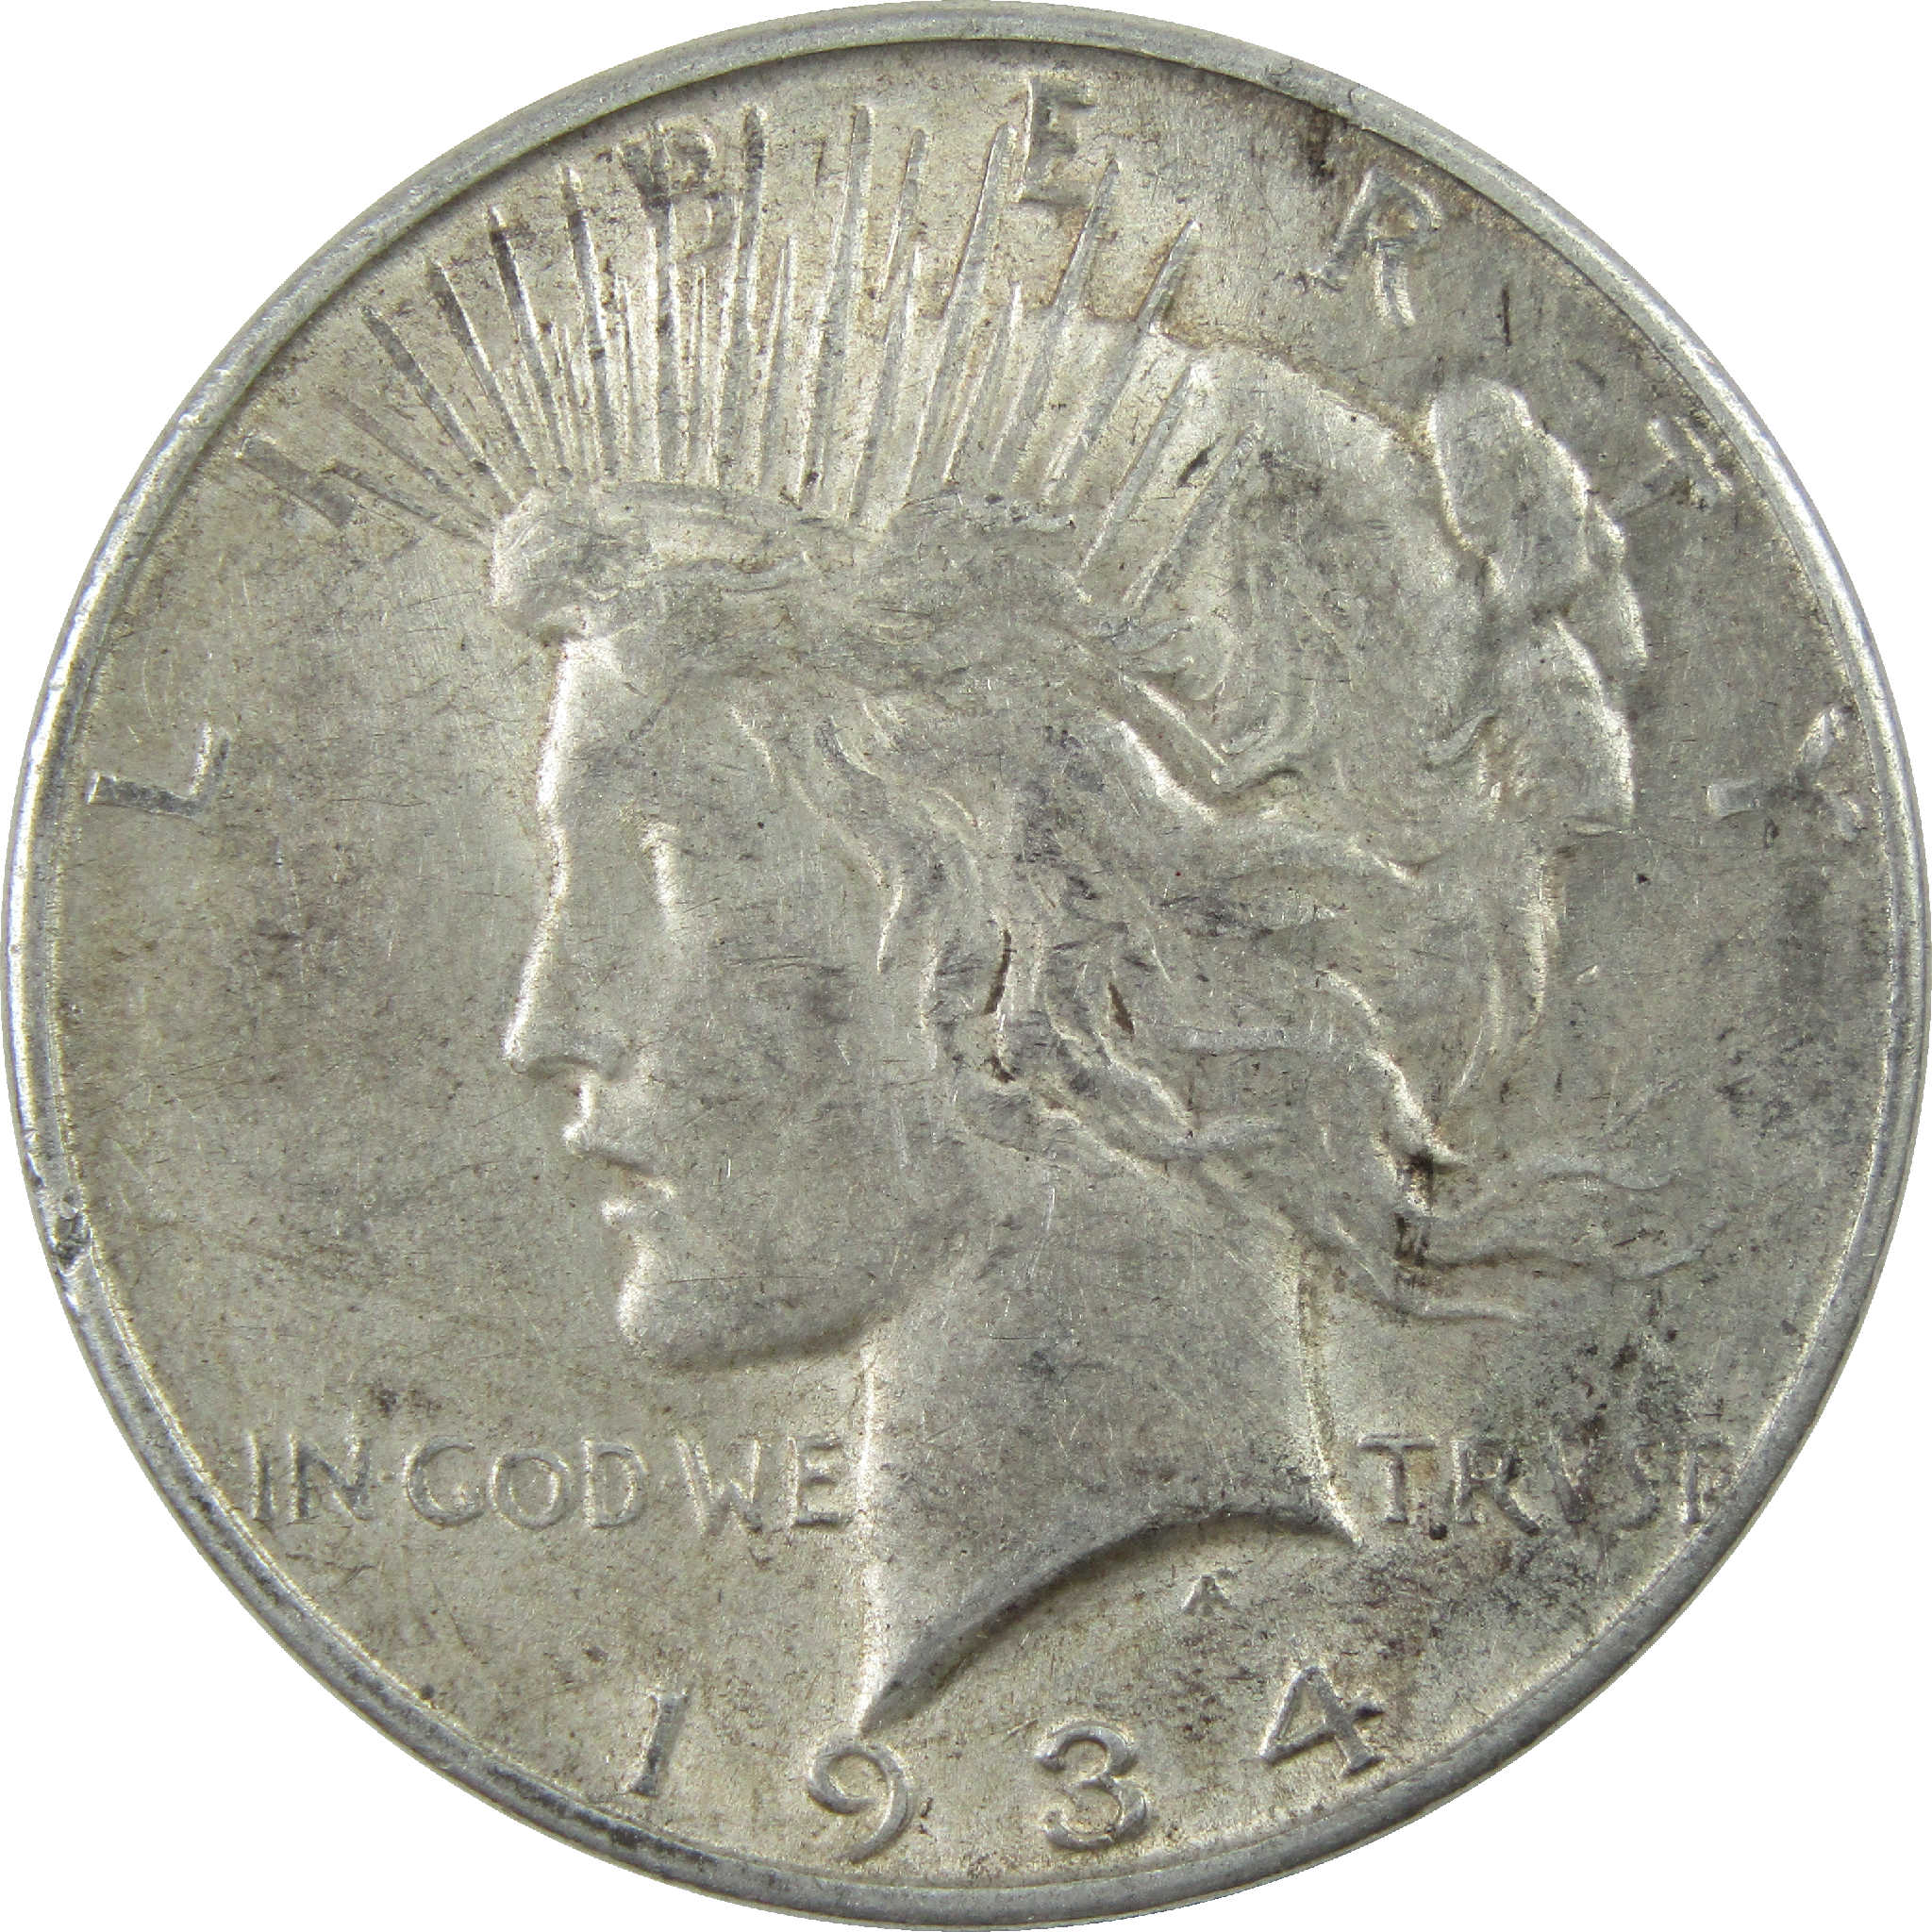 1934 D Peace Dollar XF EF Extremely Fine Silver $1 Coin SKU:I11813